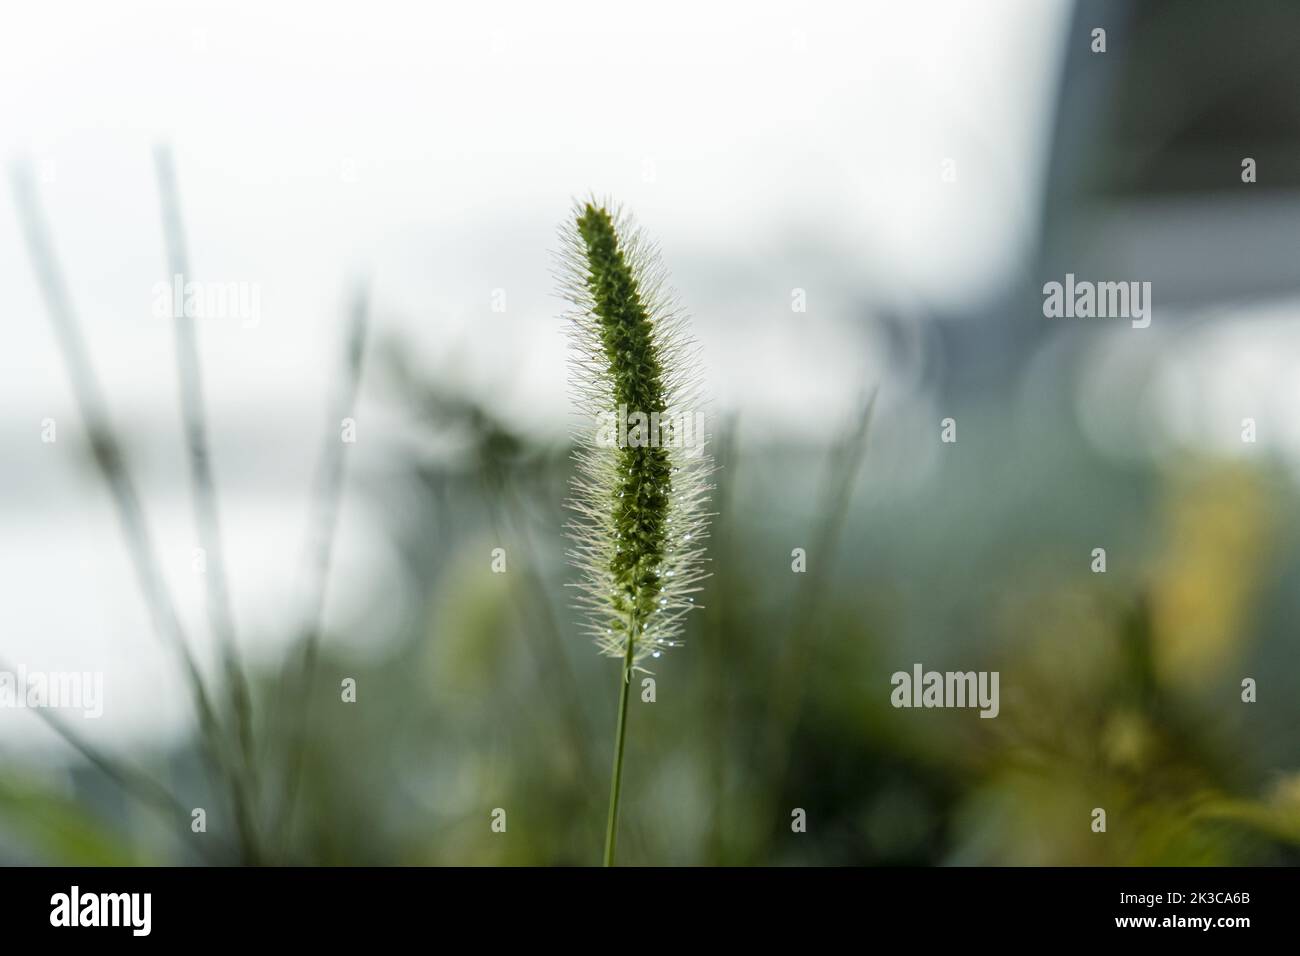 Selective focus green Setaria viridis, detailed foxtail plant, bright blurred nature background Stock Photo